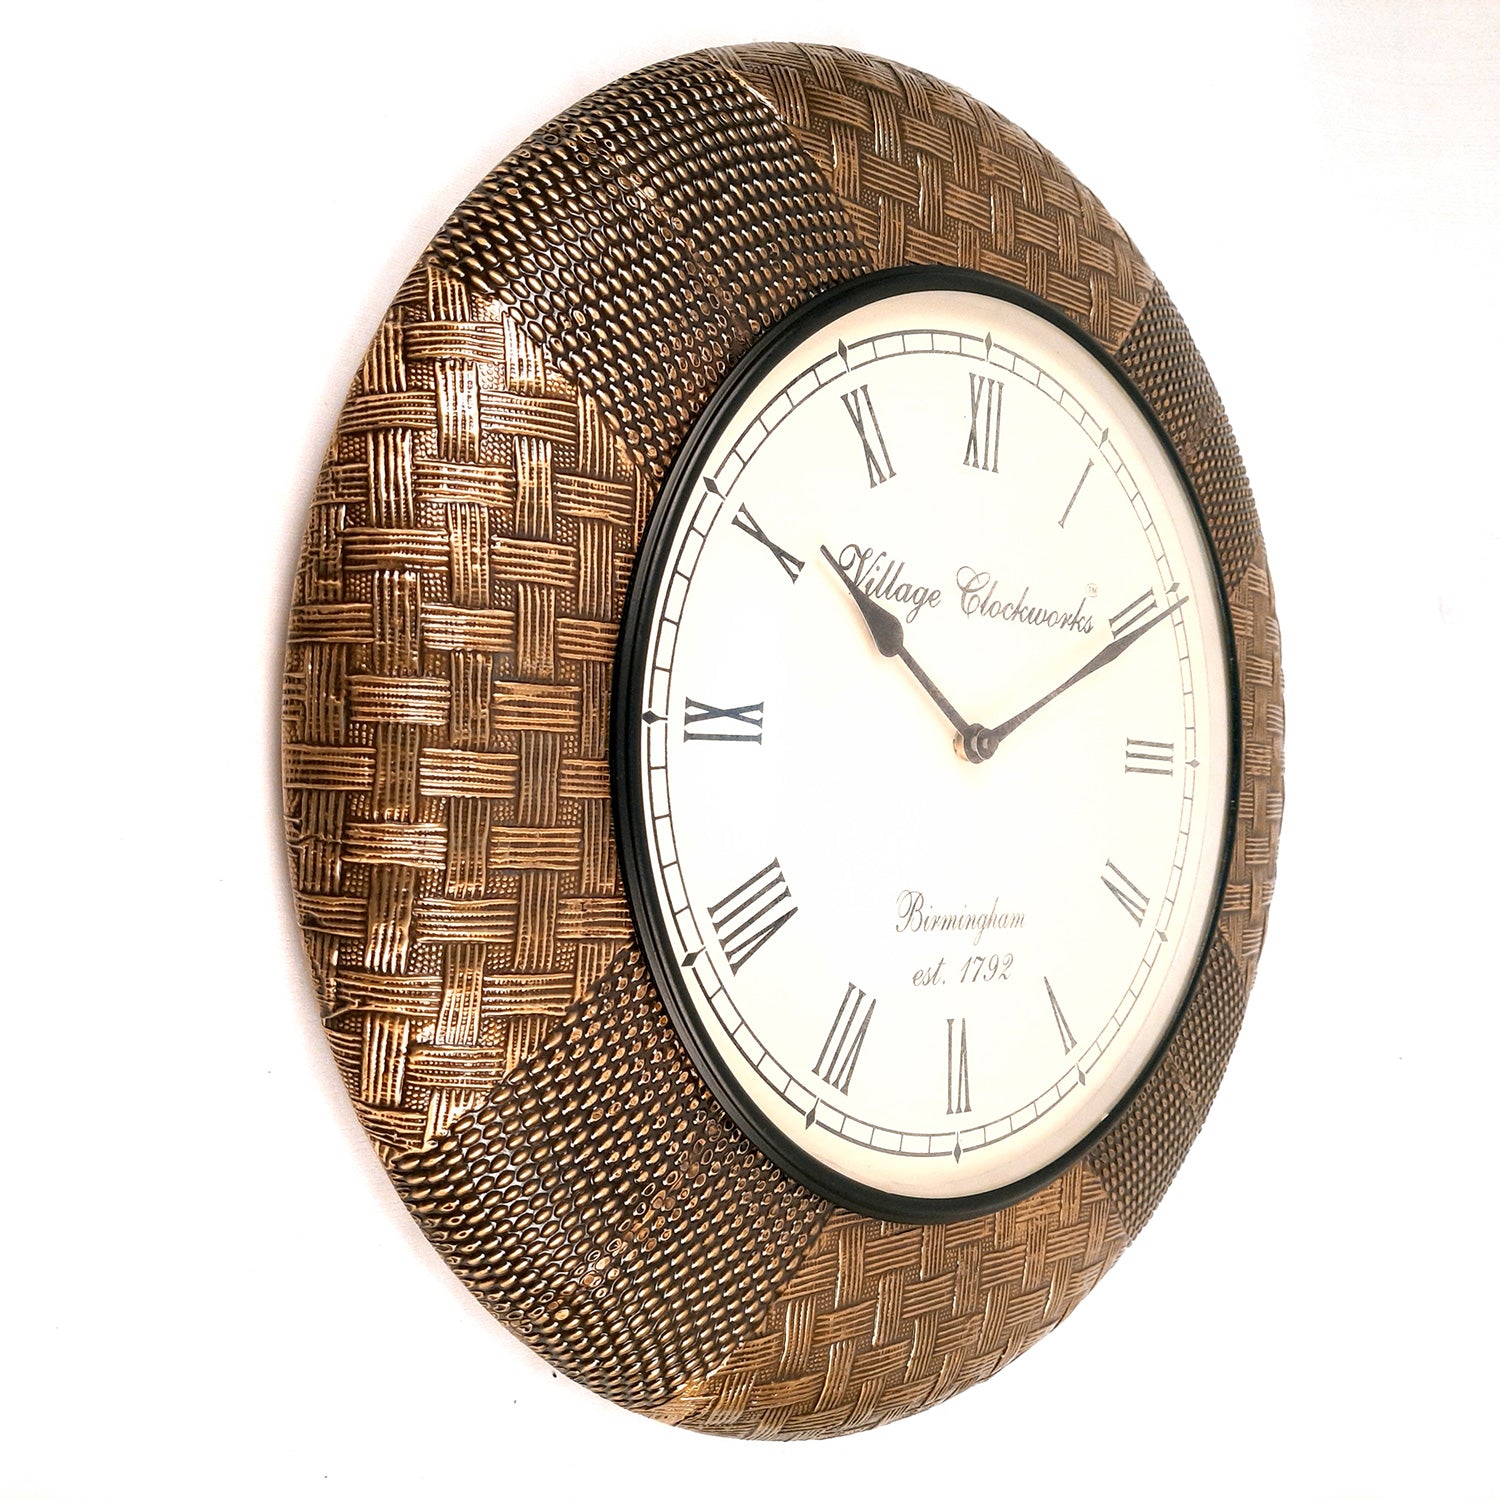 Wall Clock Wooden for Home | Analogue Clock Antique Wall Mount - For Home, Living Room, Bedroom, Hall Decor | Wedding & Housewarming Gift - 18 Inch - Apkamart